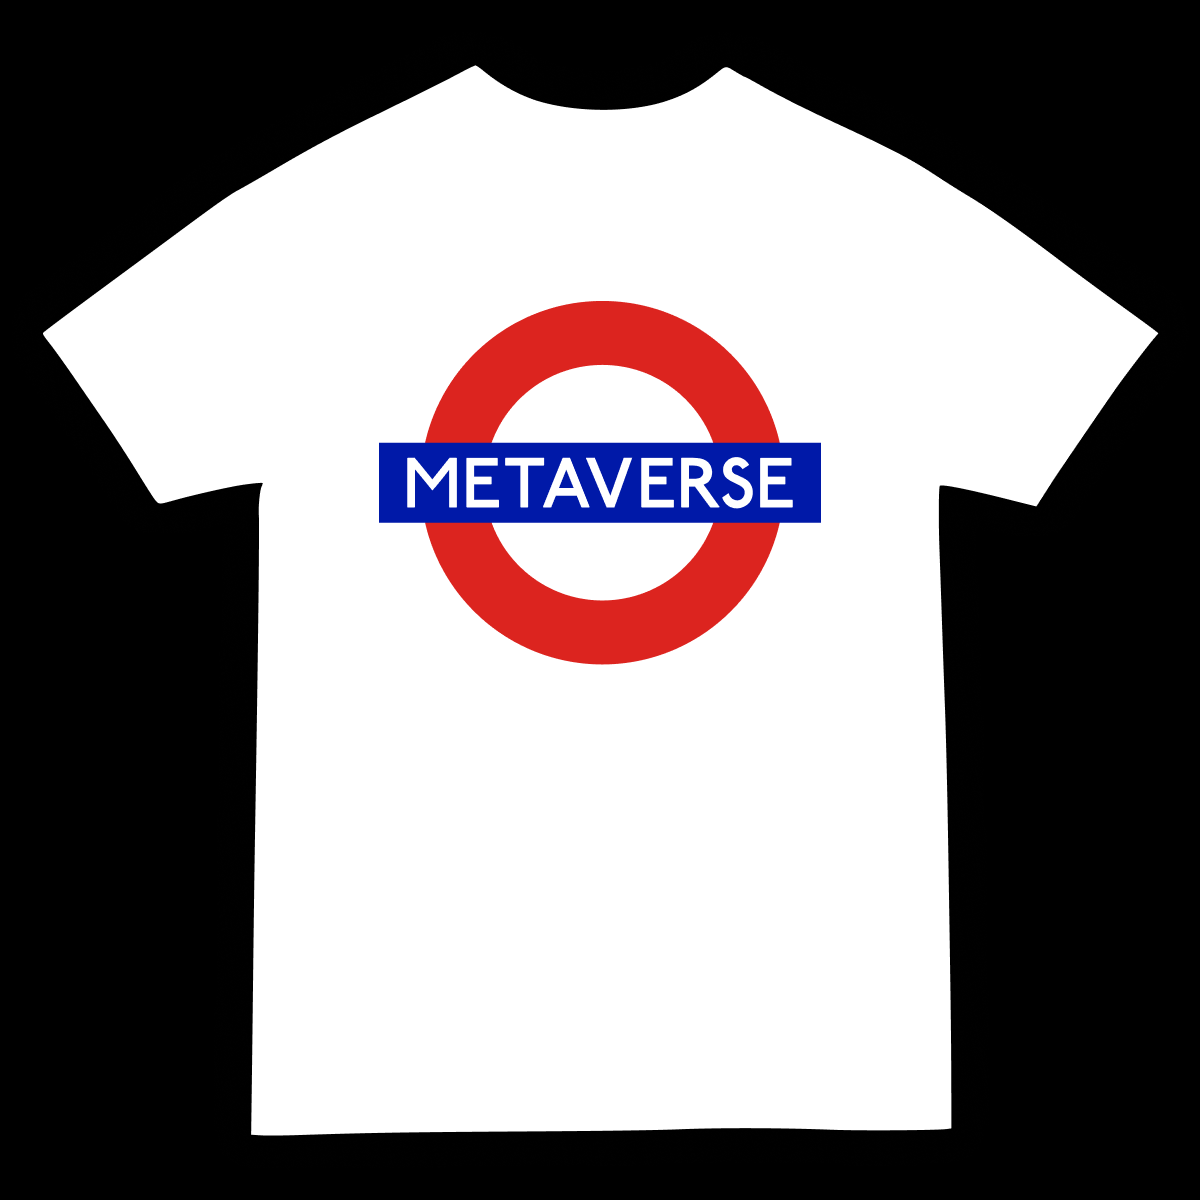 A t-shirt design. London underground logo subverted with the word underground replaced with the word Metaverse.